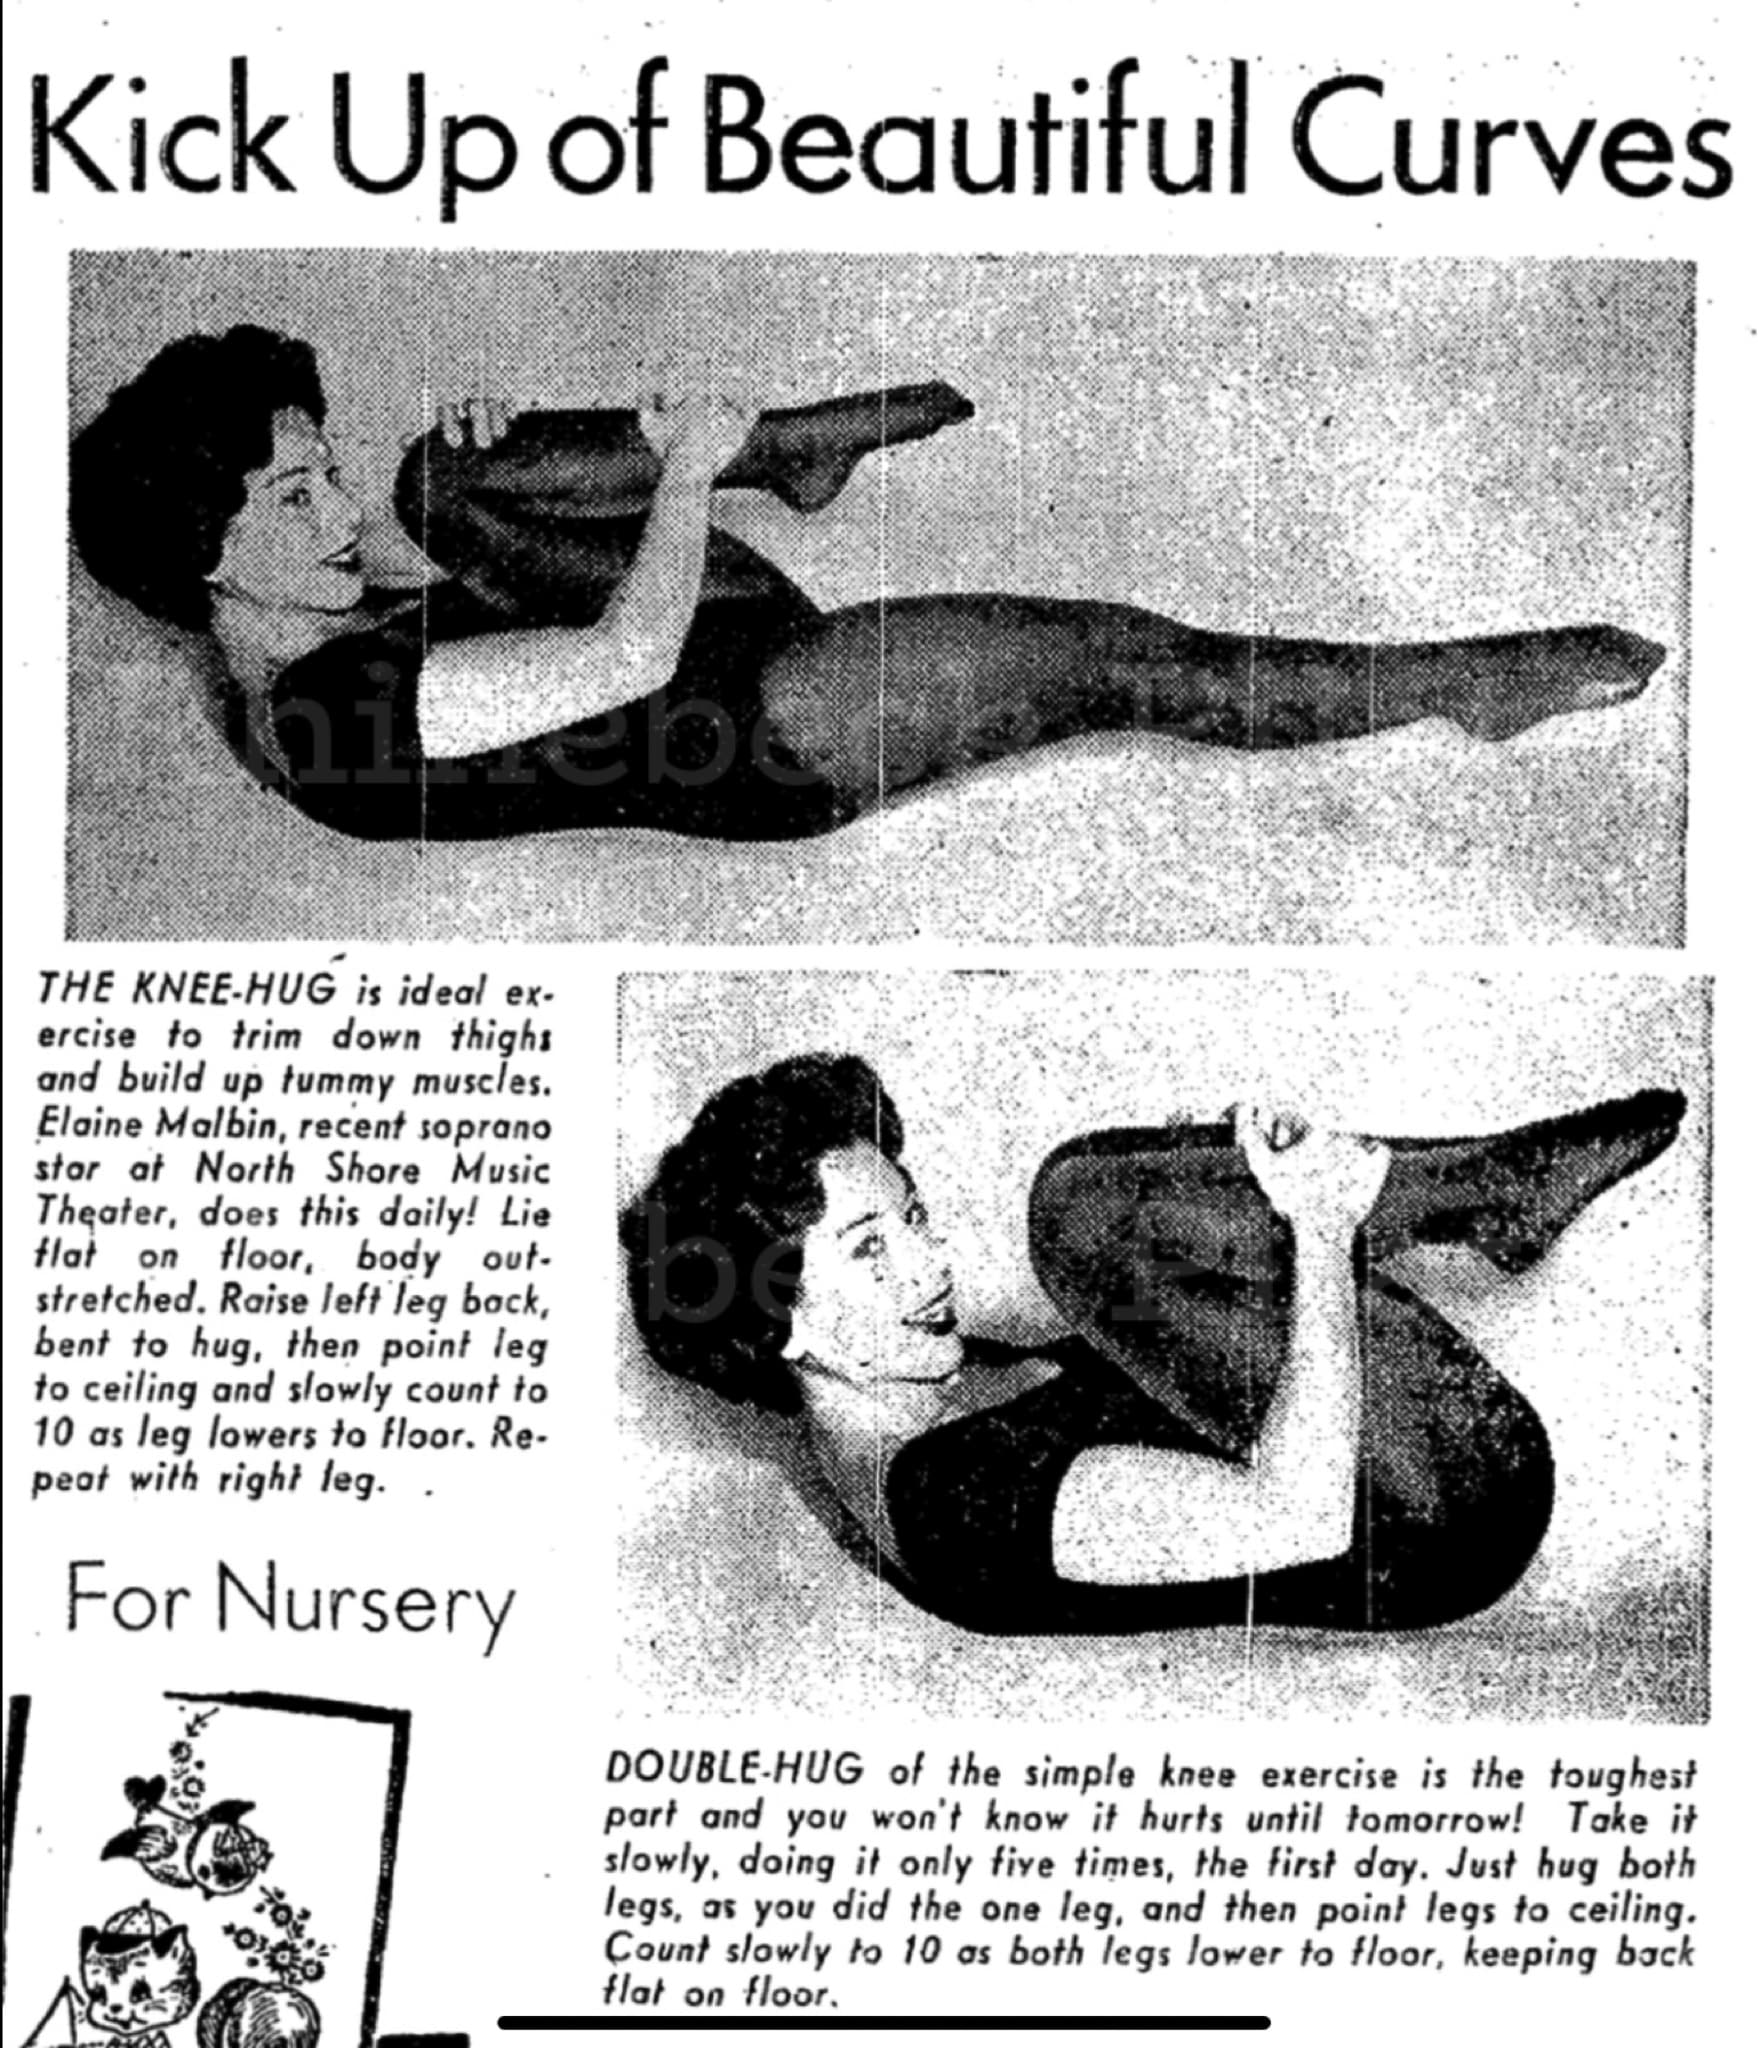 Elaine Malbin Archive Article "Kick Up of Beautiful Curves"